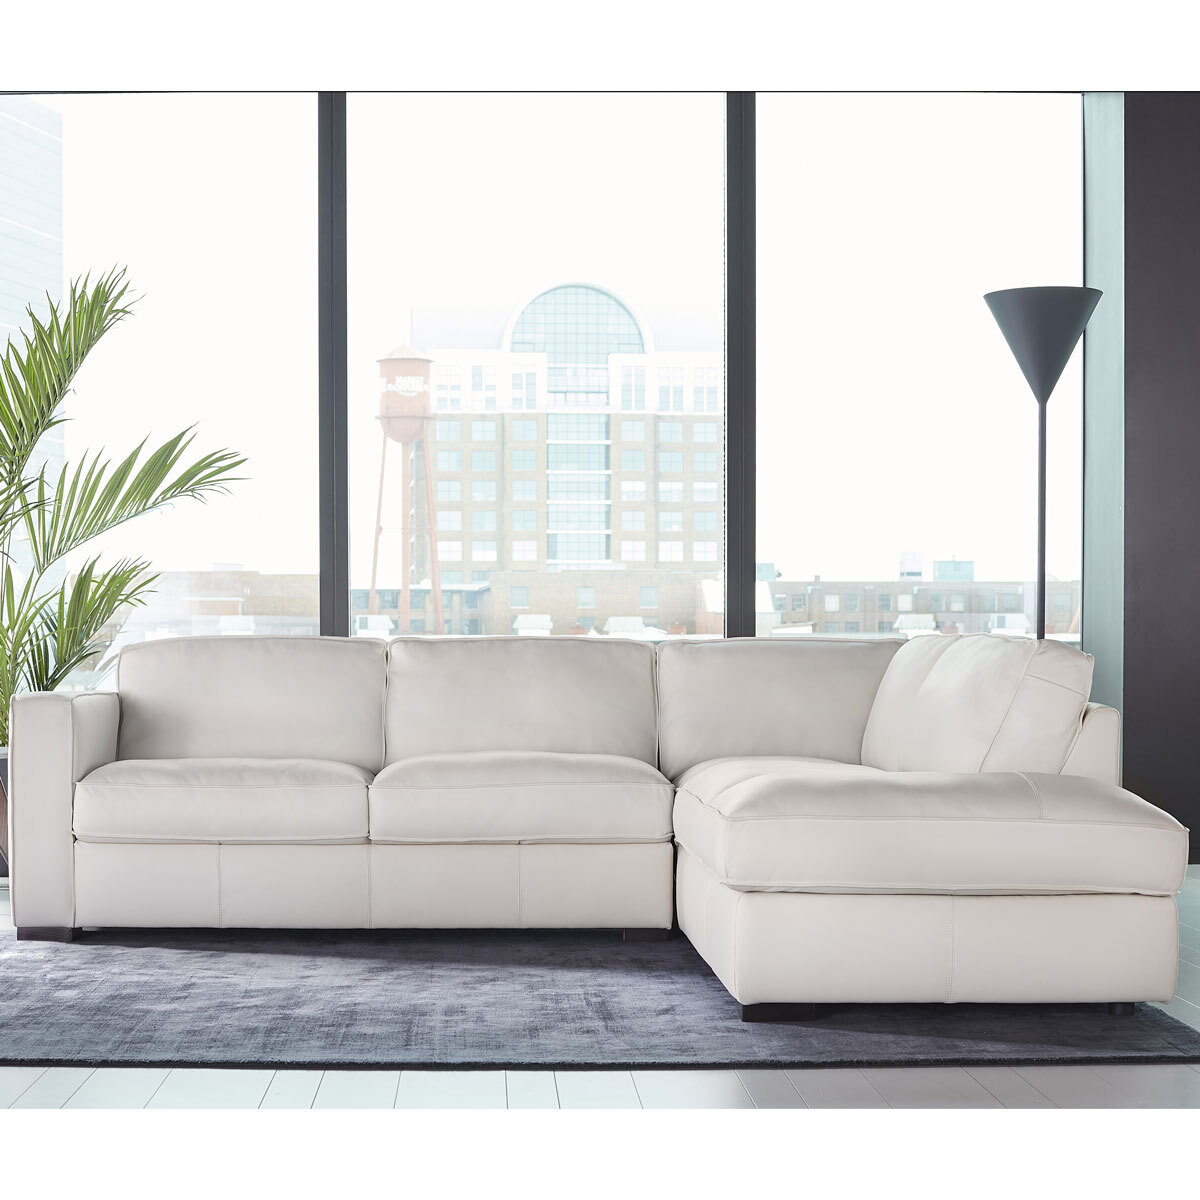 Natuzzigroup Cream Leather Sectional, Leather Sofa Beds Costco